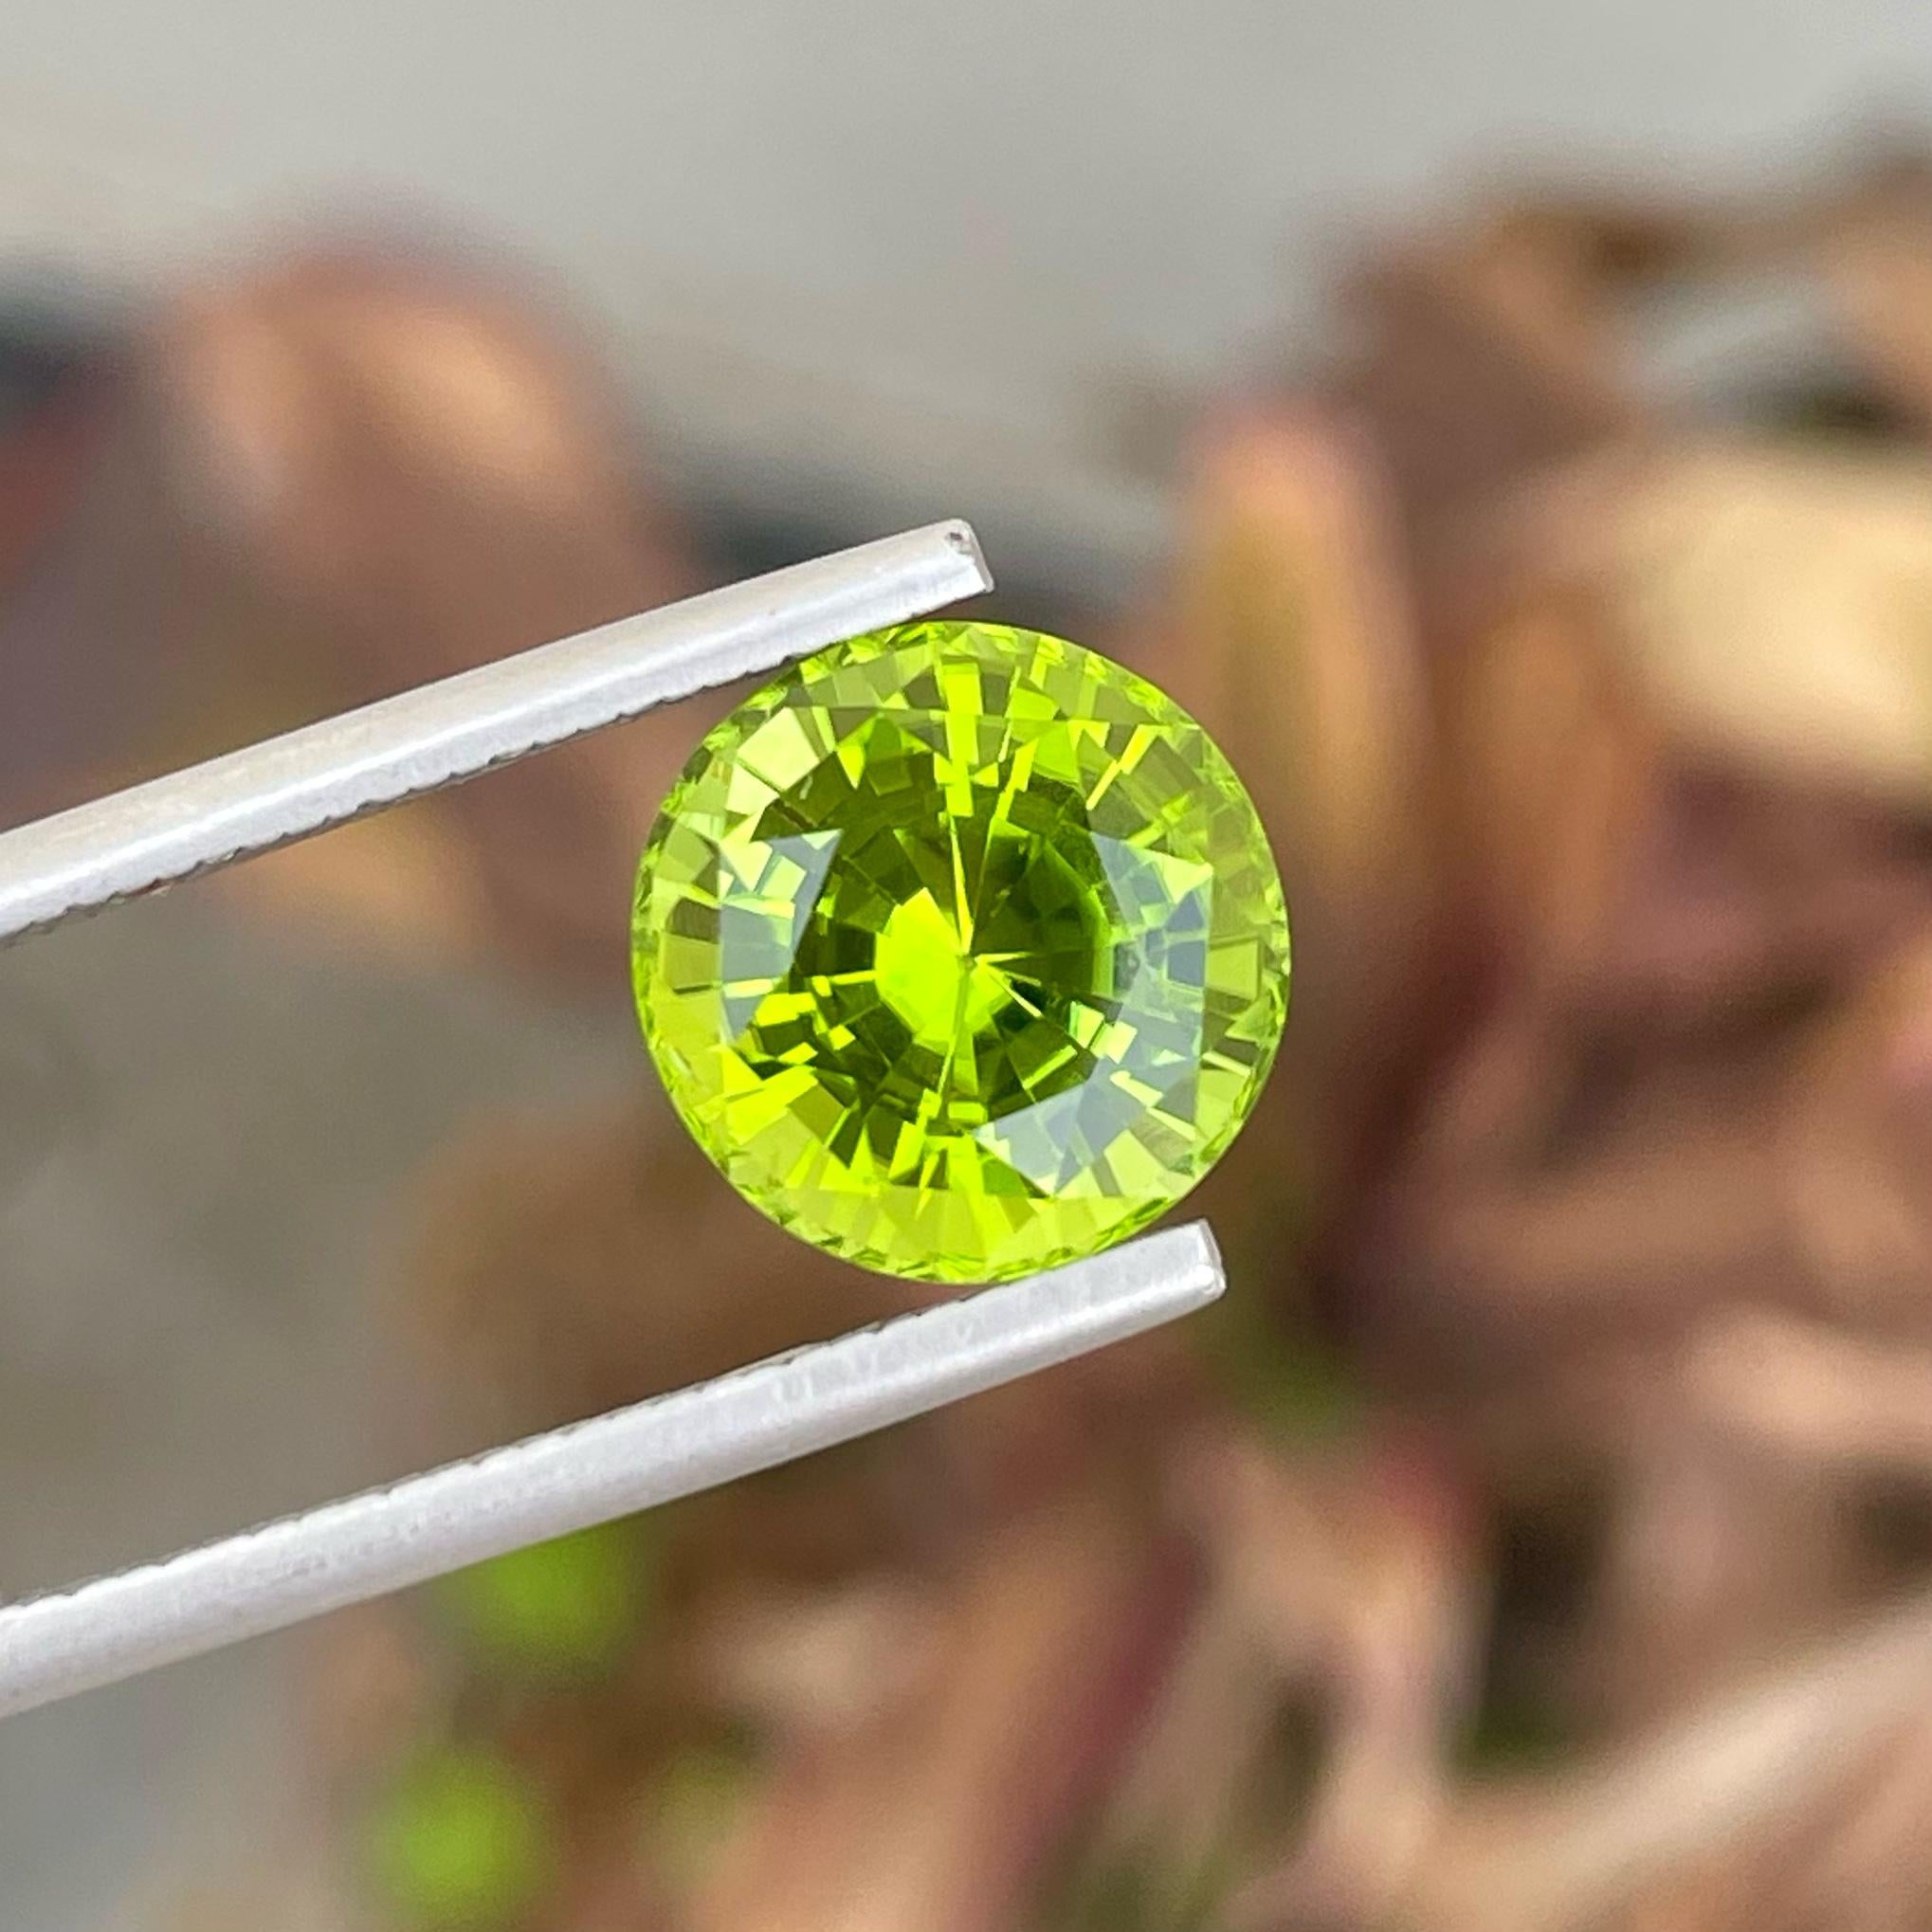 Weight 5.65 carats 
Dimensions 10.9x10.9x7.5mm
Treatment none 
Origin Pakistan 
Clarity VVS
Shape Round
Cut Round brilliant 

The Peridot gemstone, also known as 